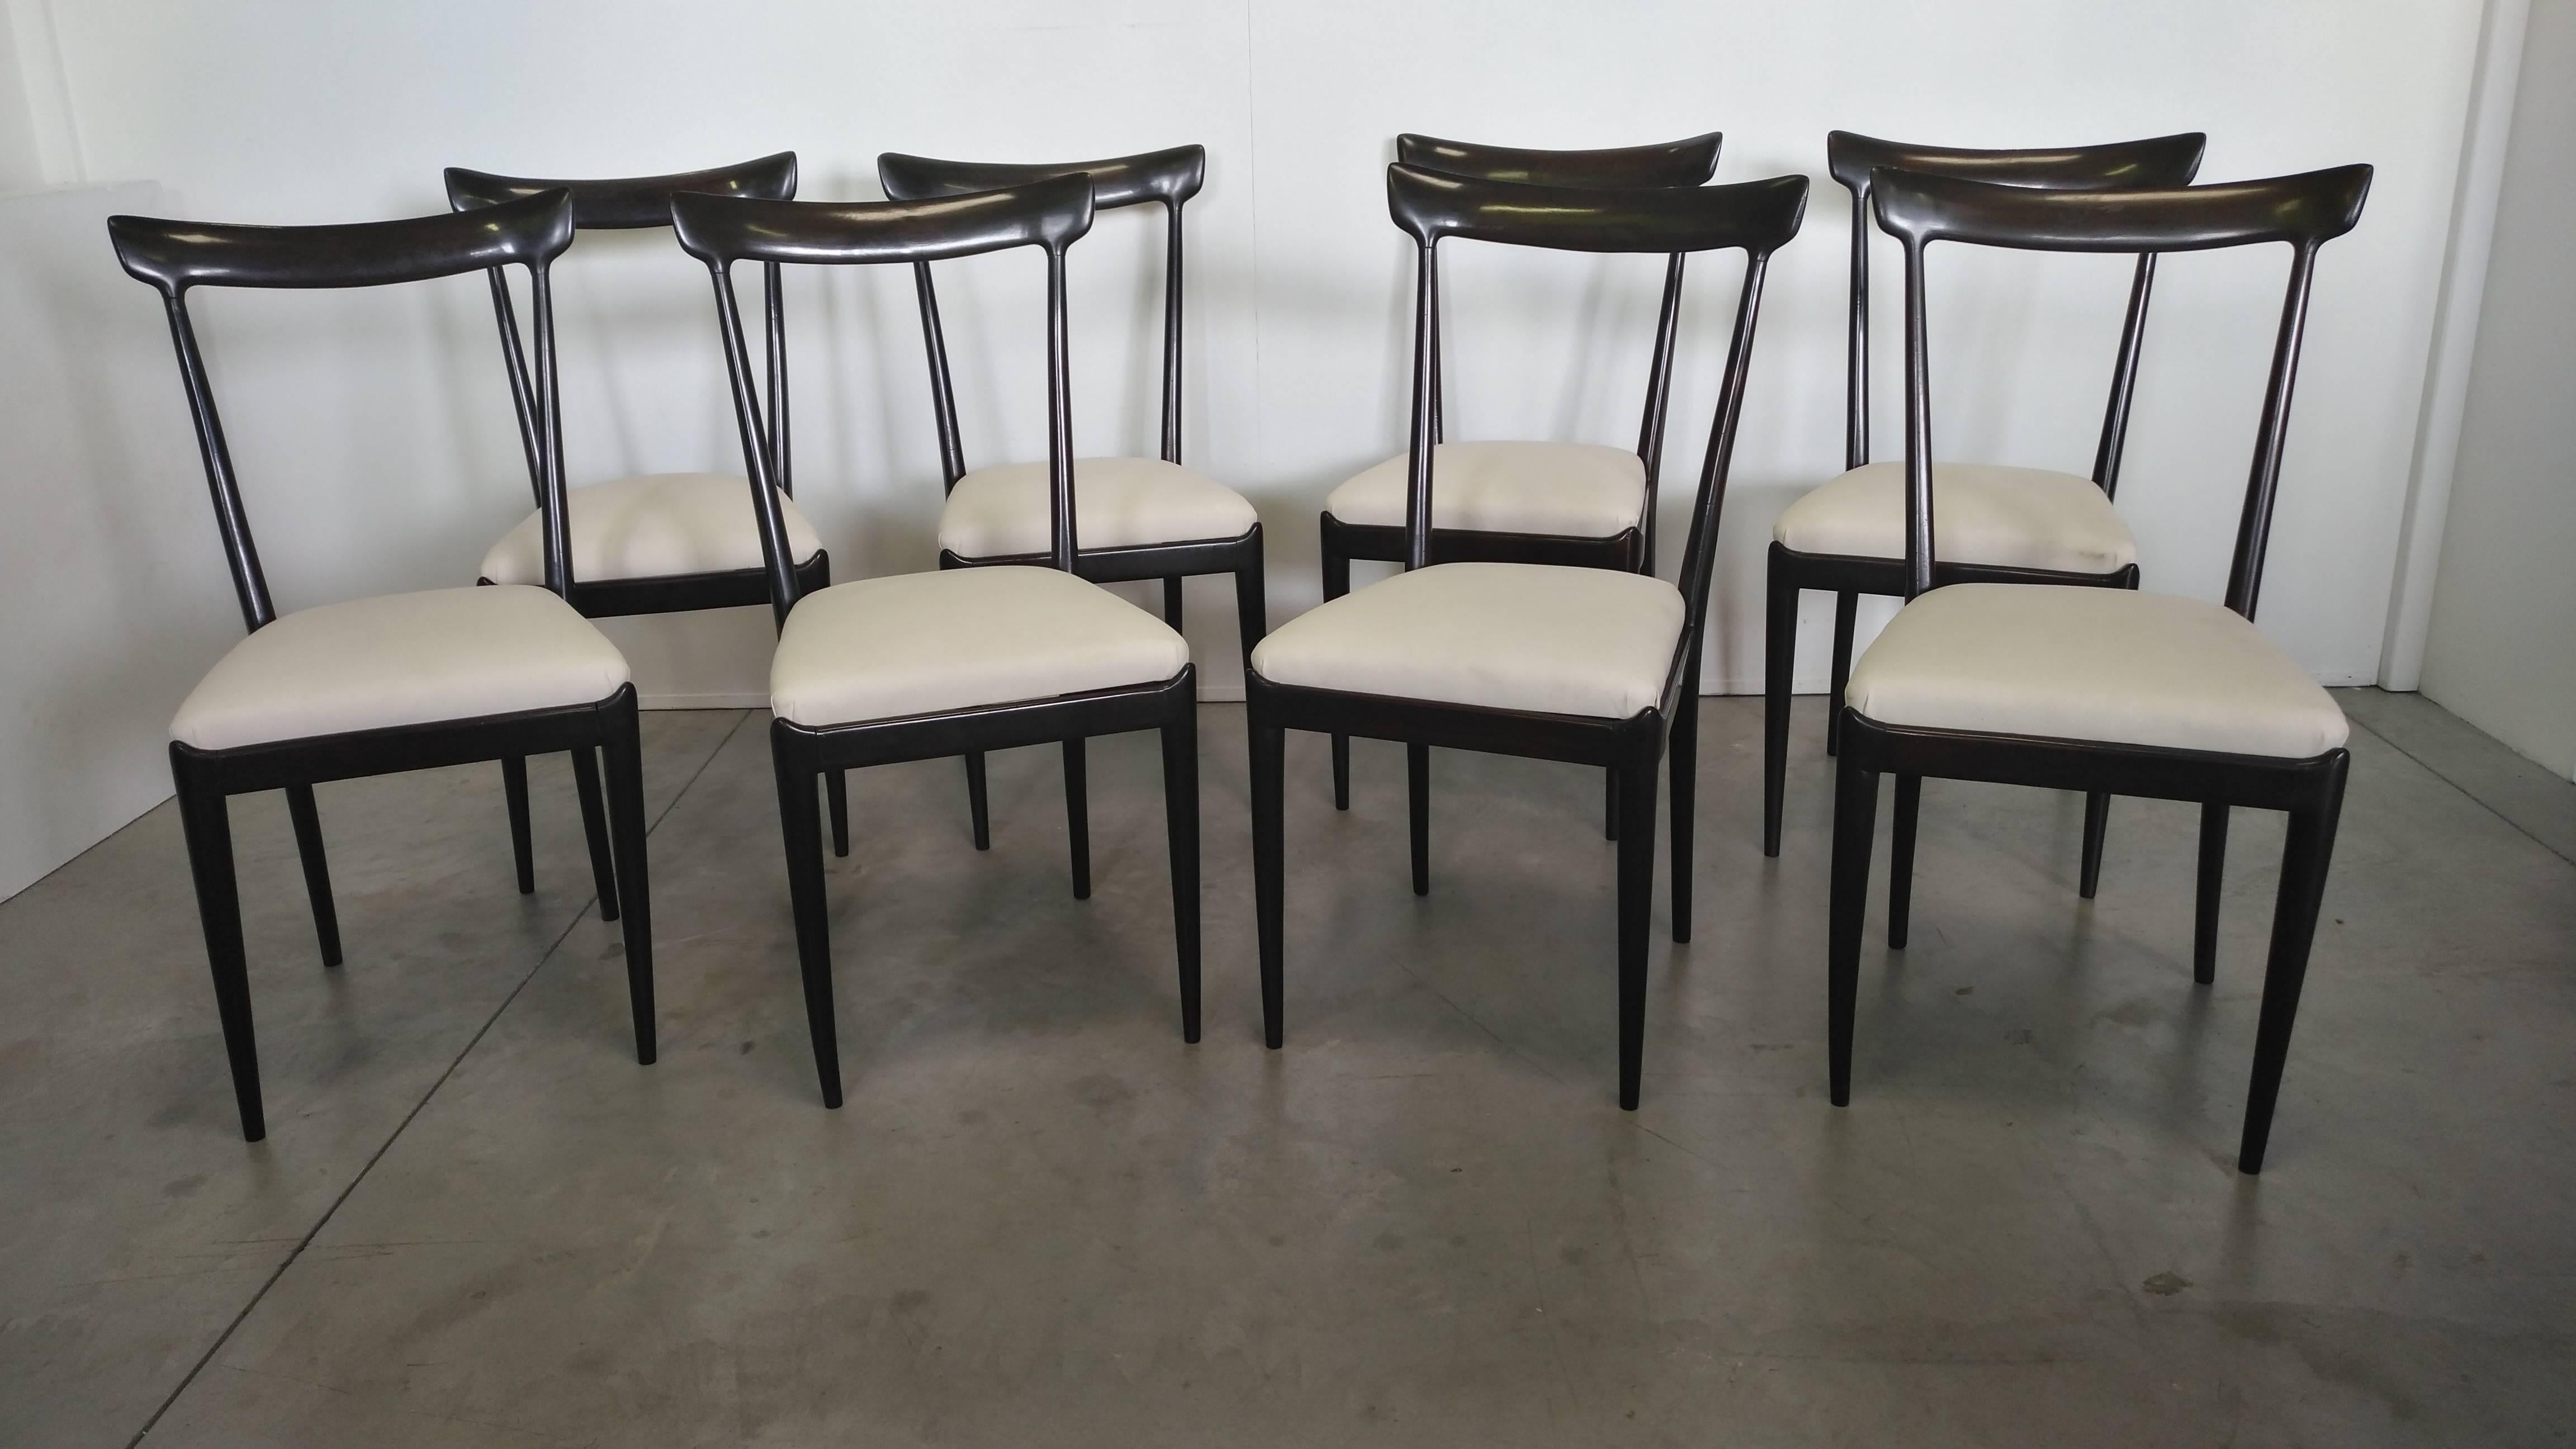 Rare set of eight rosewood chairs designed by Ico Parisi in 1947 and manufactured by Ariberto Colombo in Cantu' 
This model was called 38A and presented for the first time at the fair 